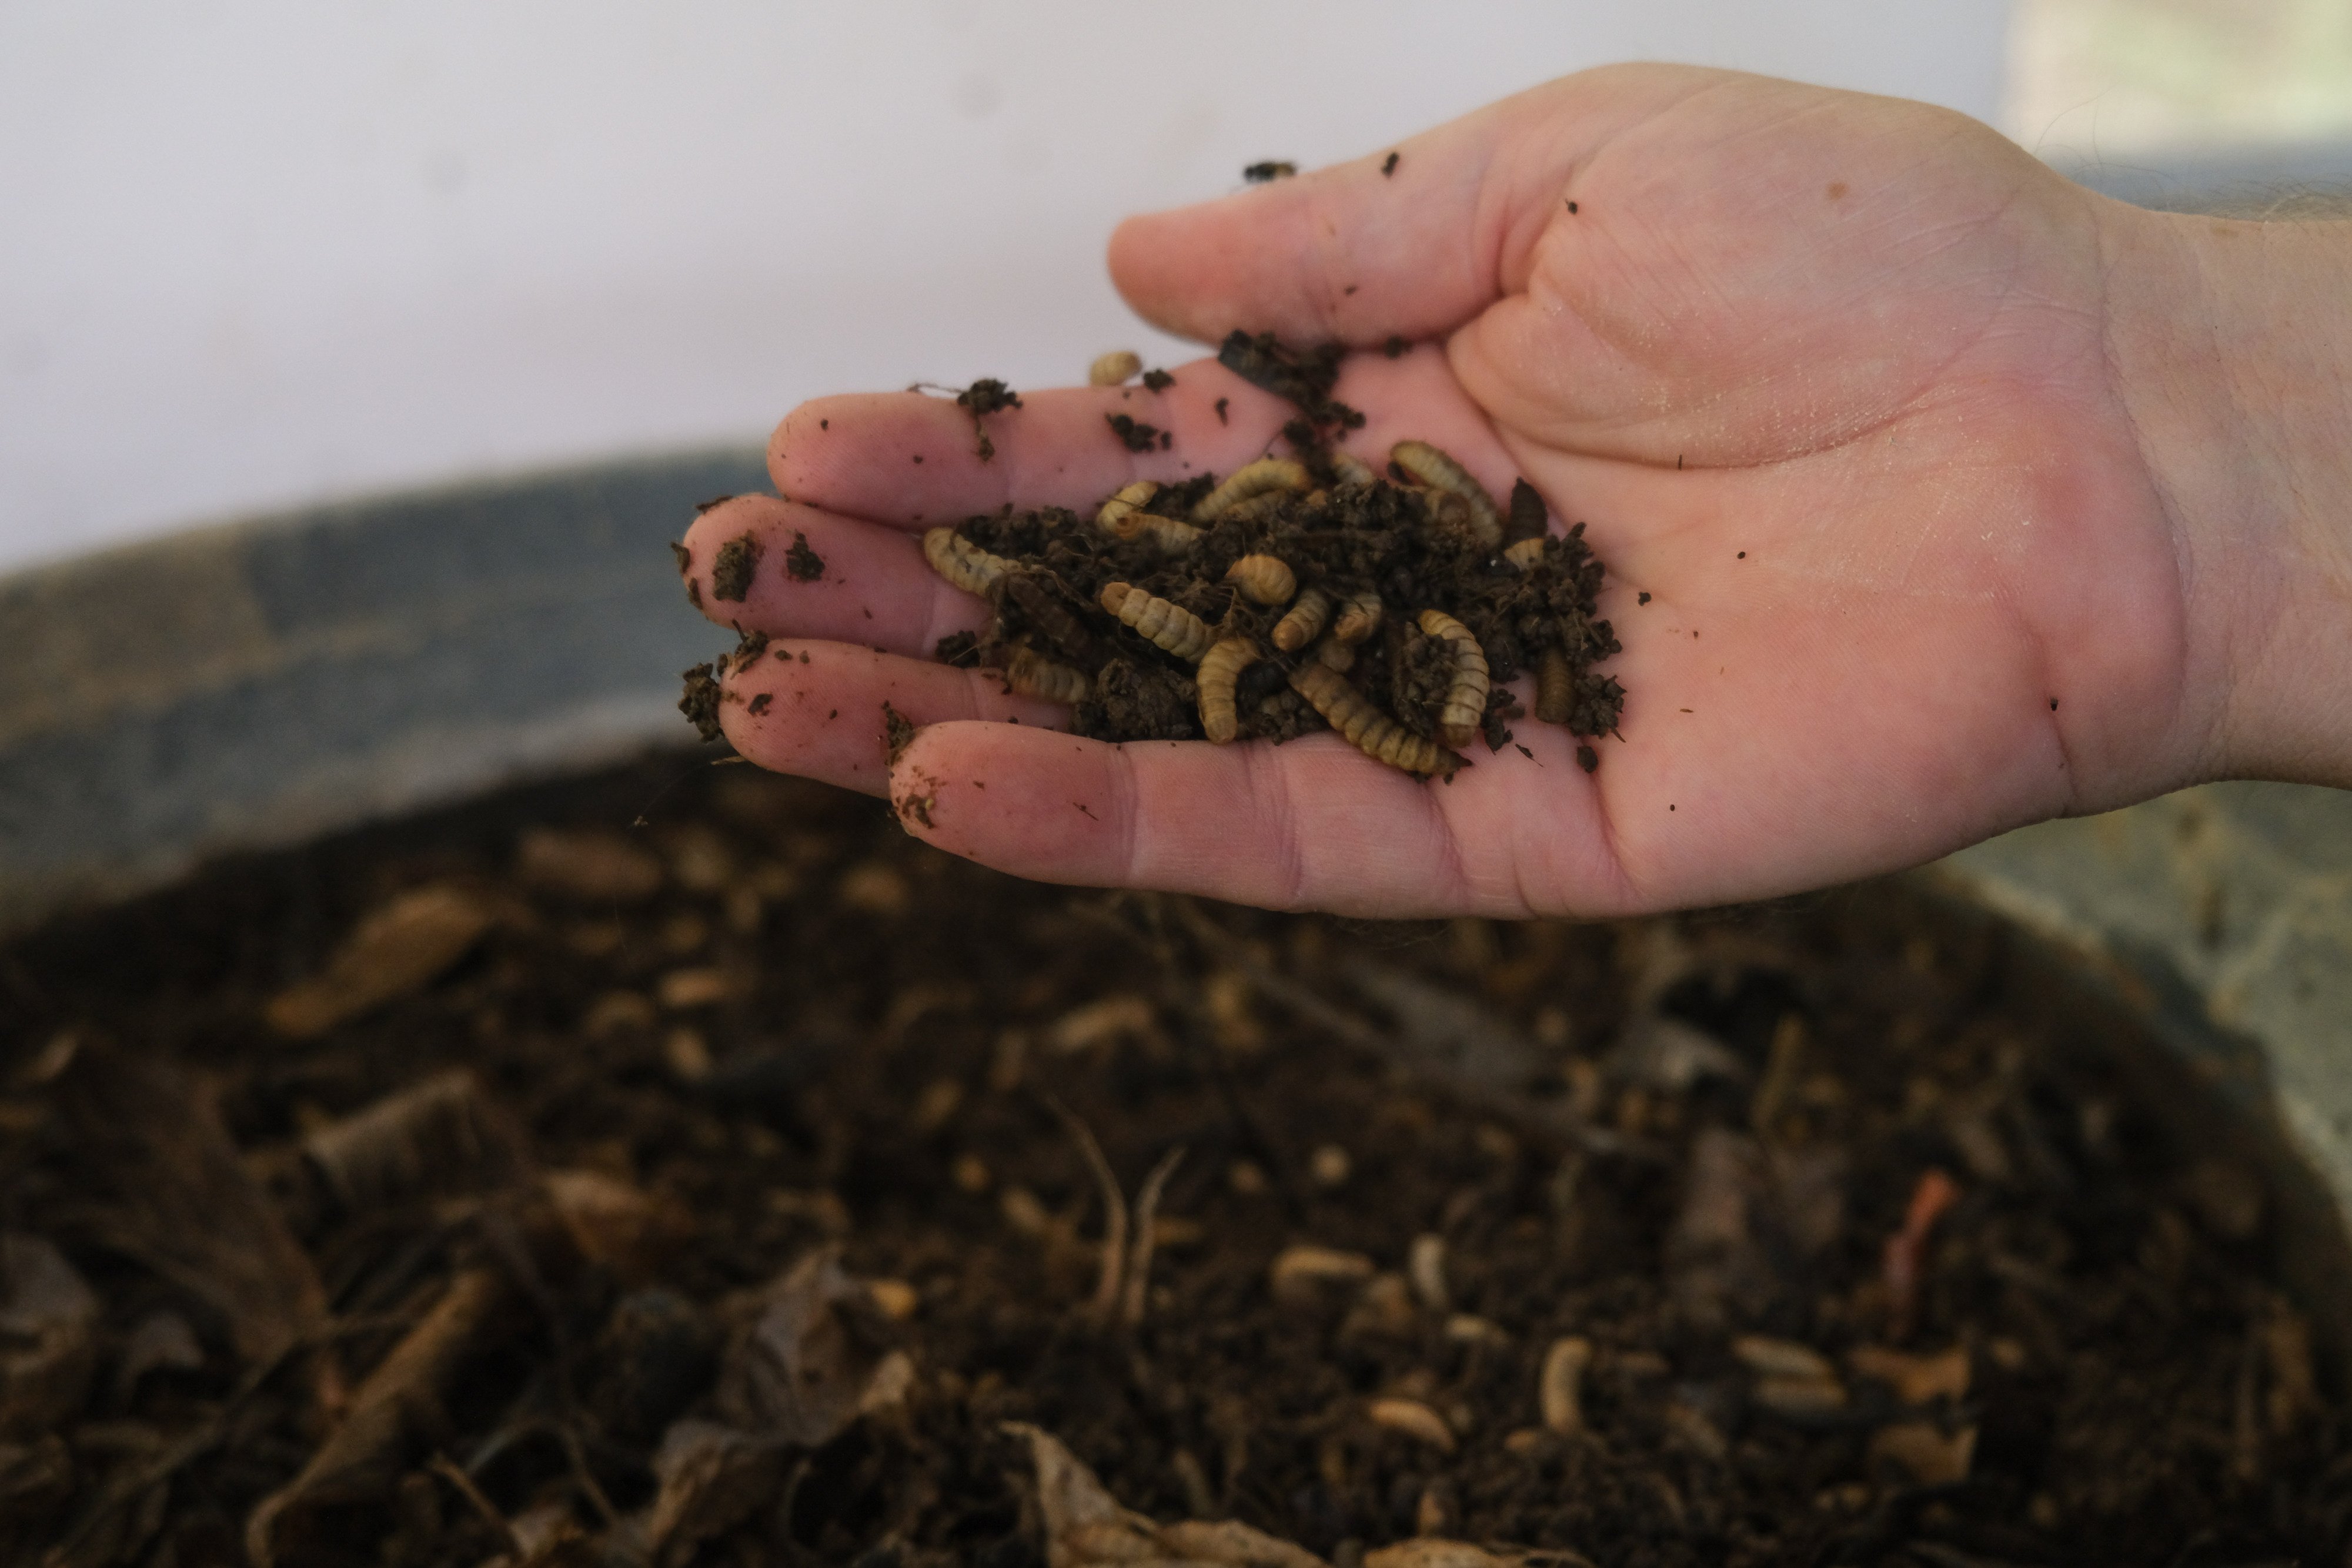 The larvae of black soldier flies can be very useful in the problem of food waste going to landfill. Photo: Handout